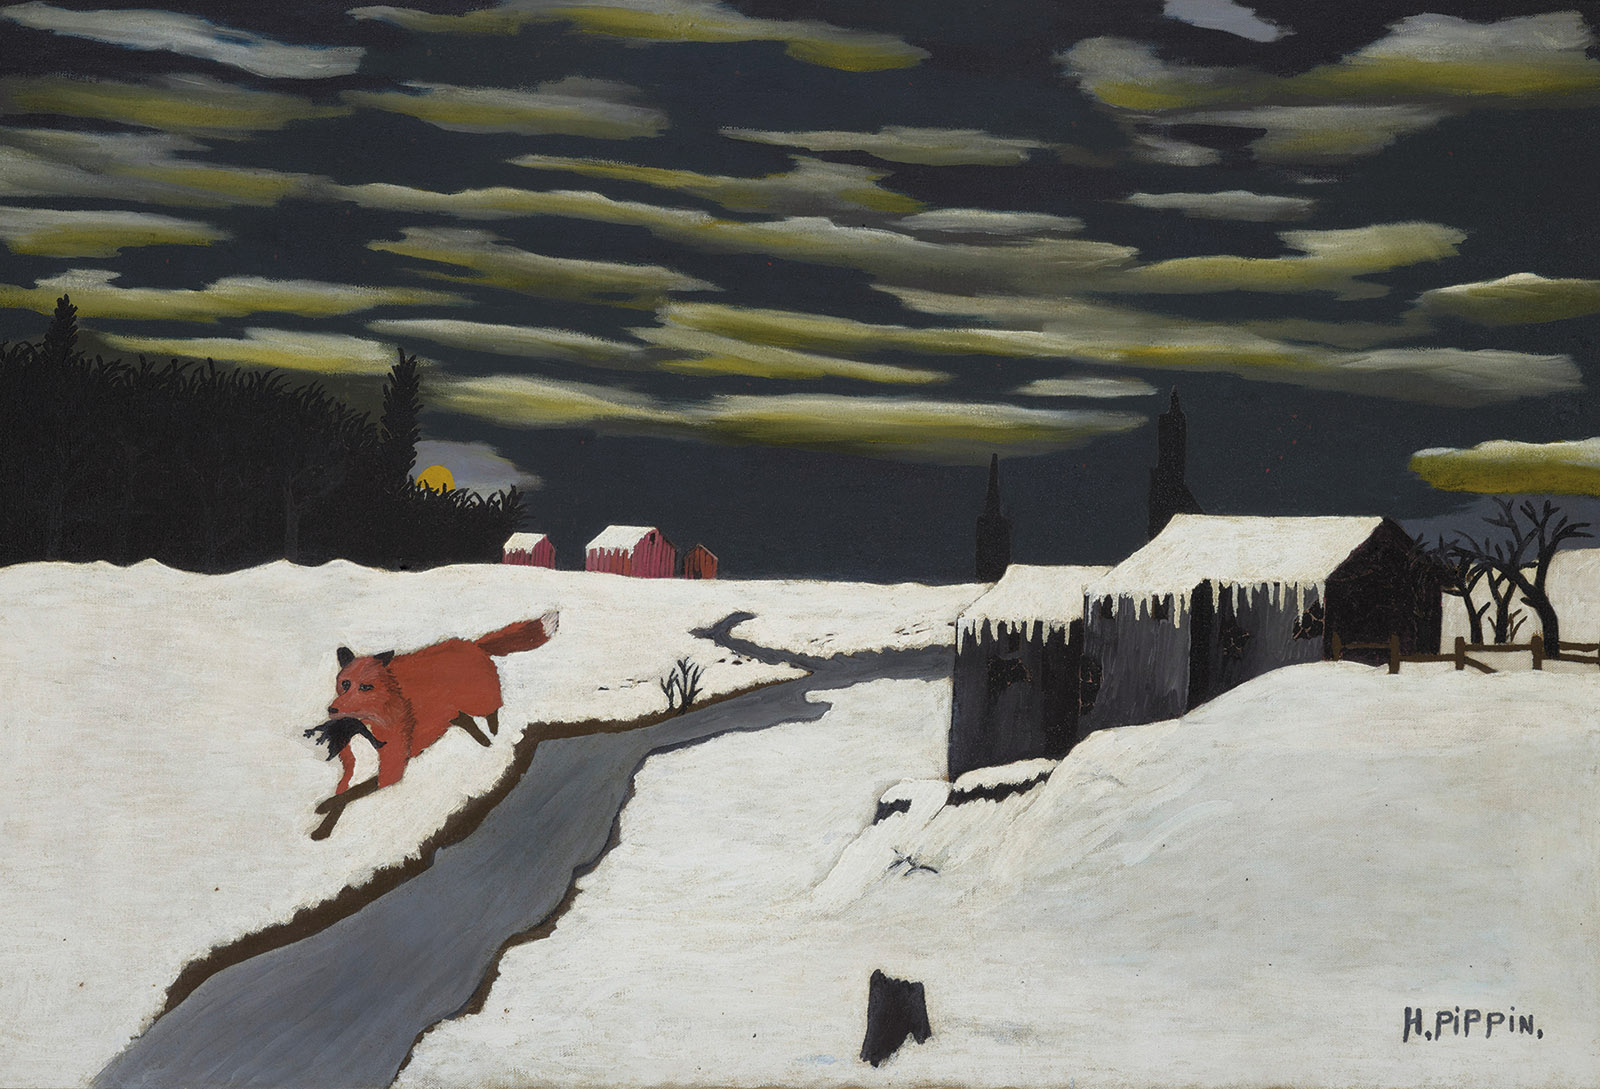 Horace Pippin: The Getaway, 24 5/8 x 36 inches, 1939